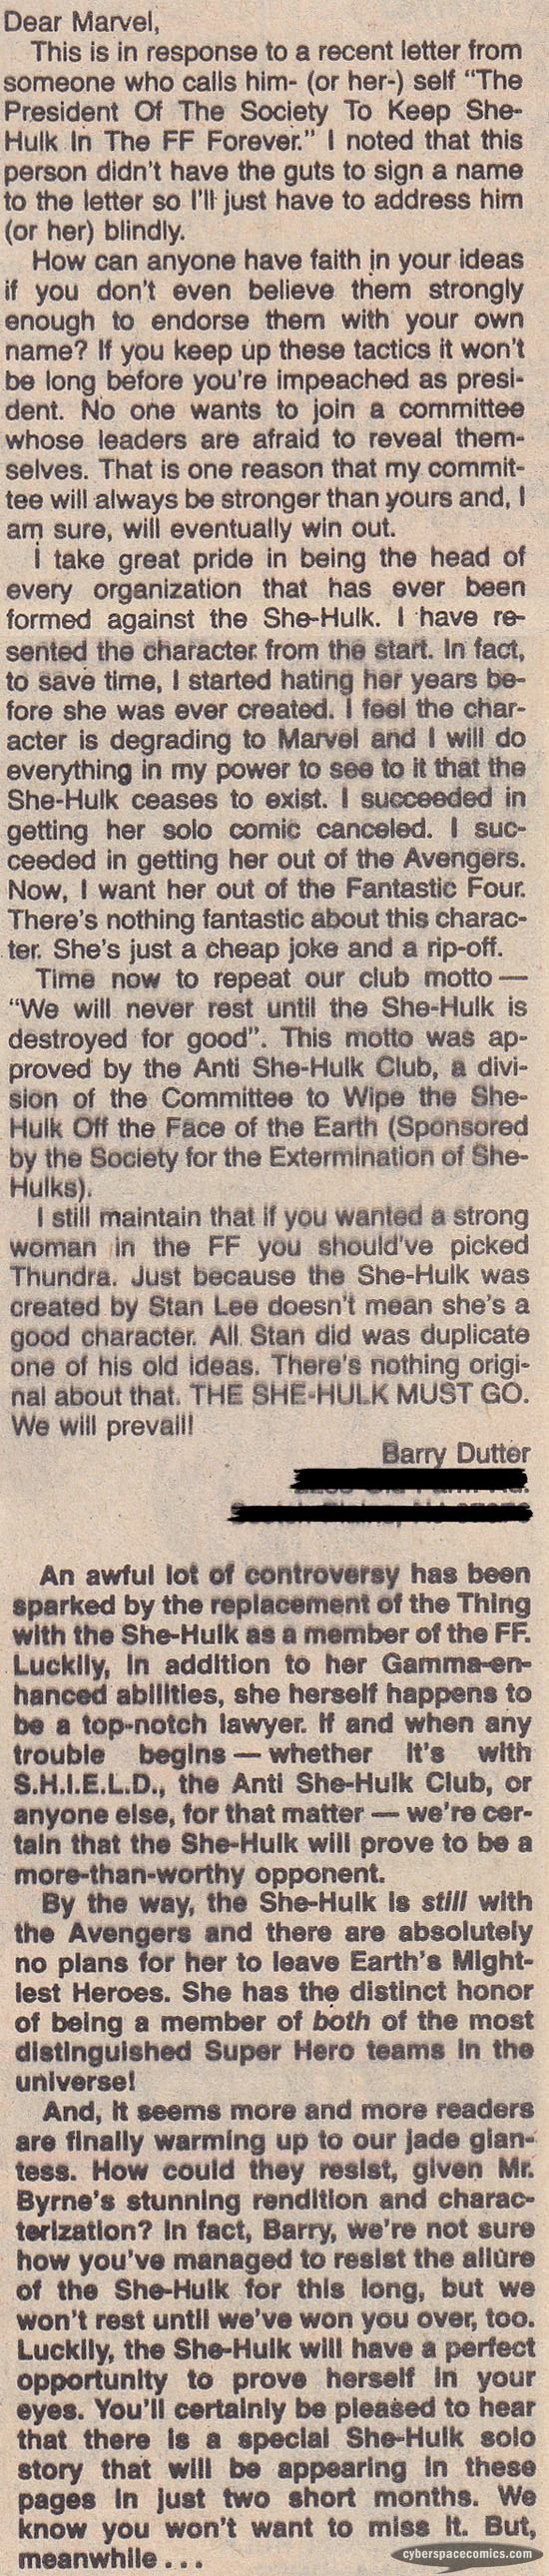 Marvels Comics: Fantastic Four letters page with Barry Dutter